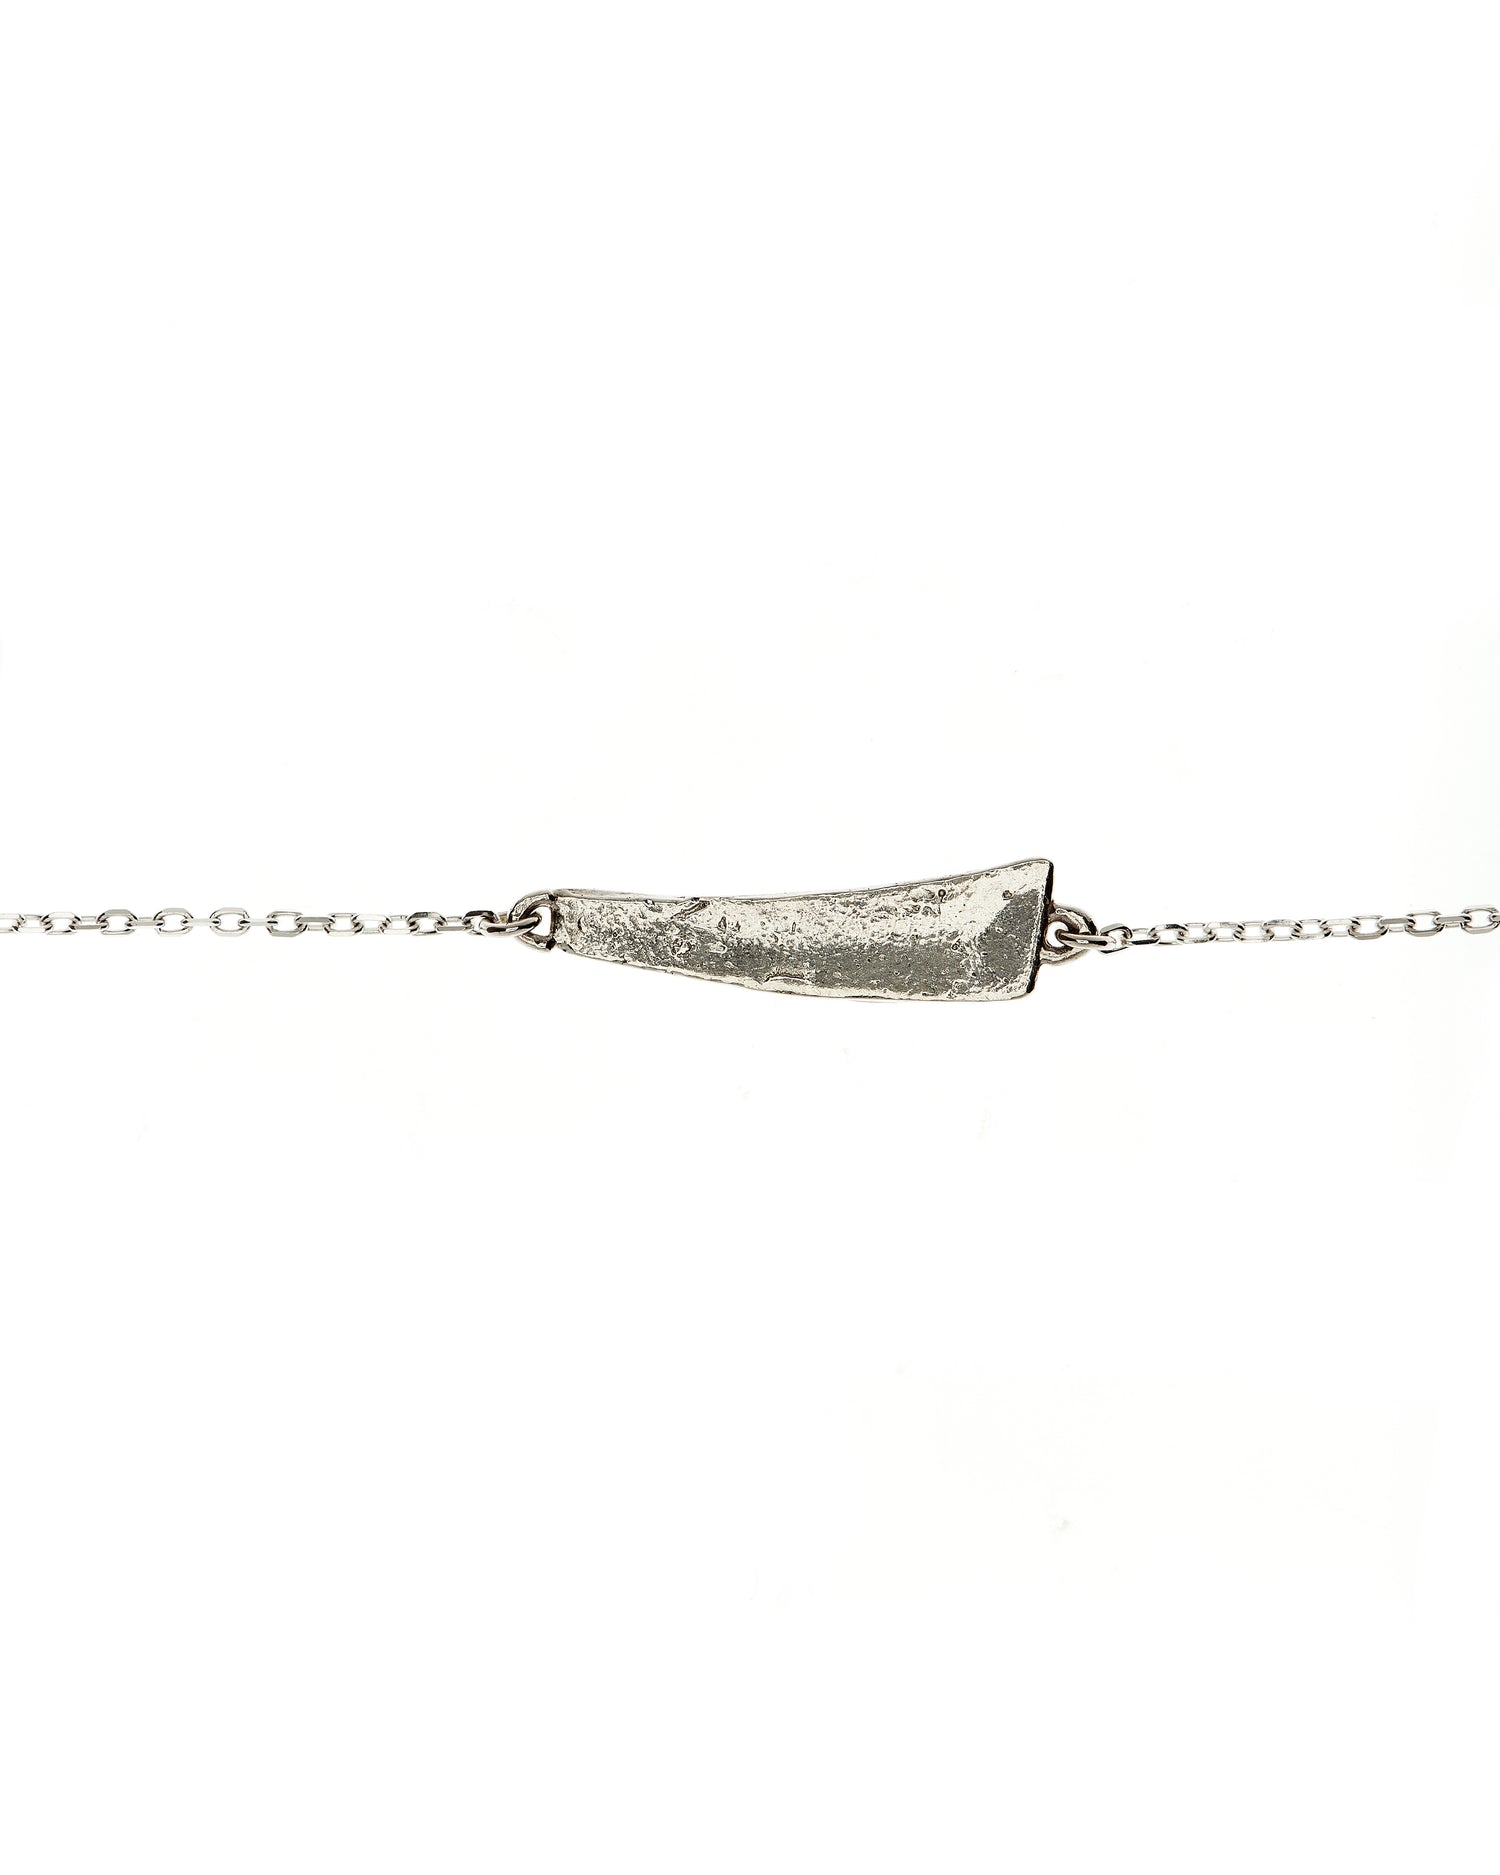 Sterling silver necklace designed in shape of sheath